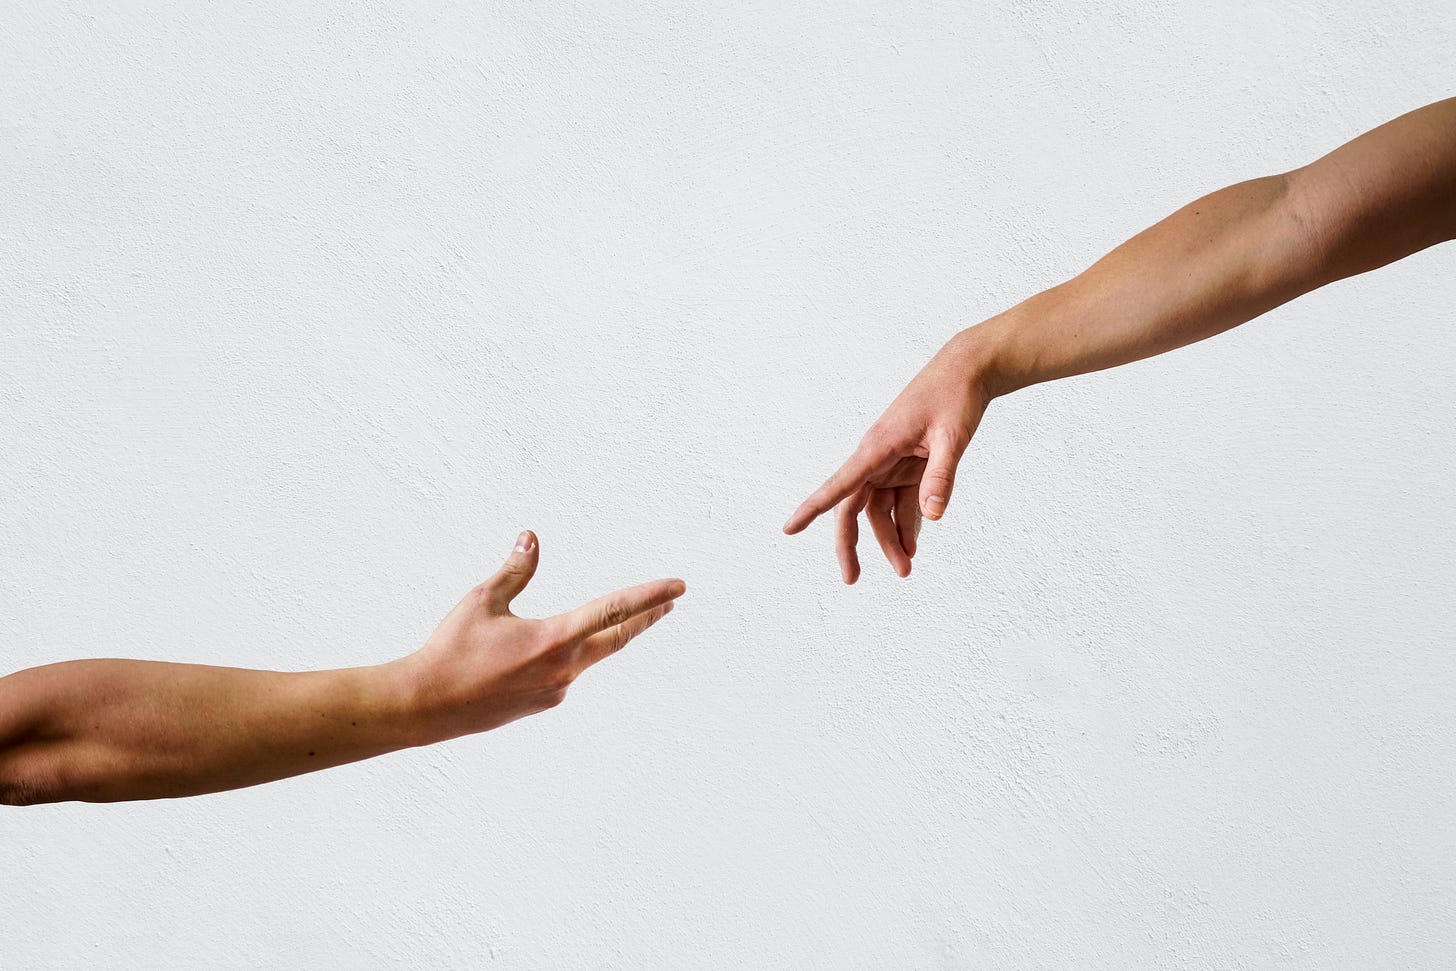 Two hands reaching towards one another. We can see the arms up to the elbow. Both arms are bare. Each person is Caucasian. The background is white.